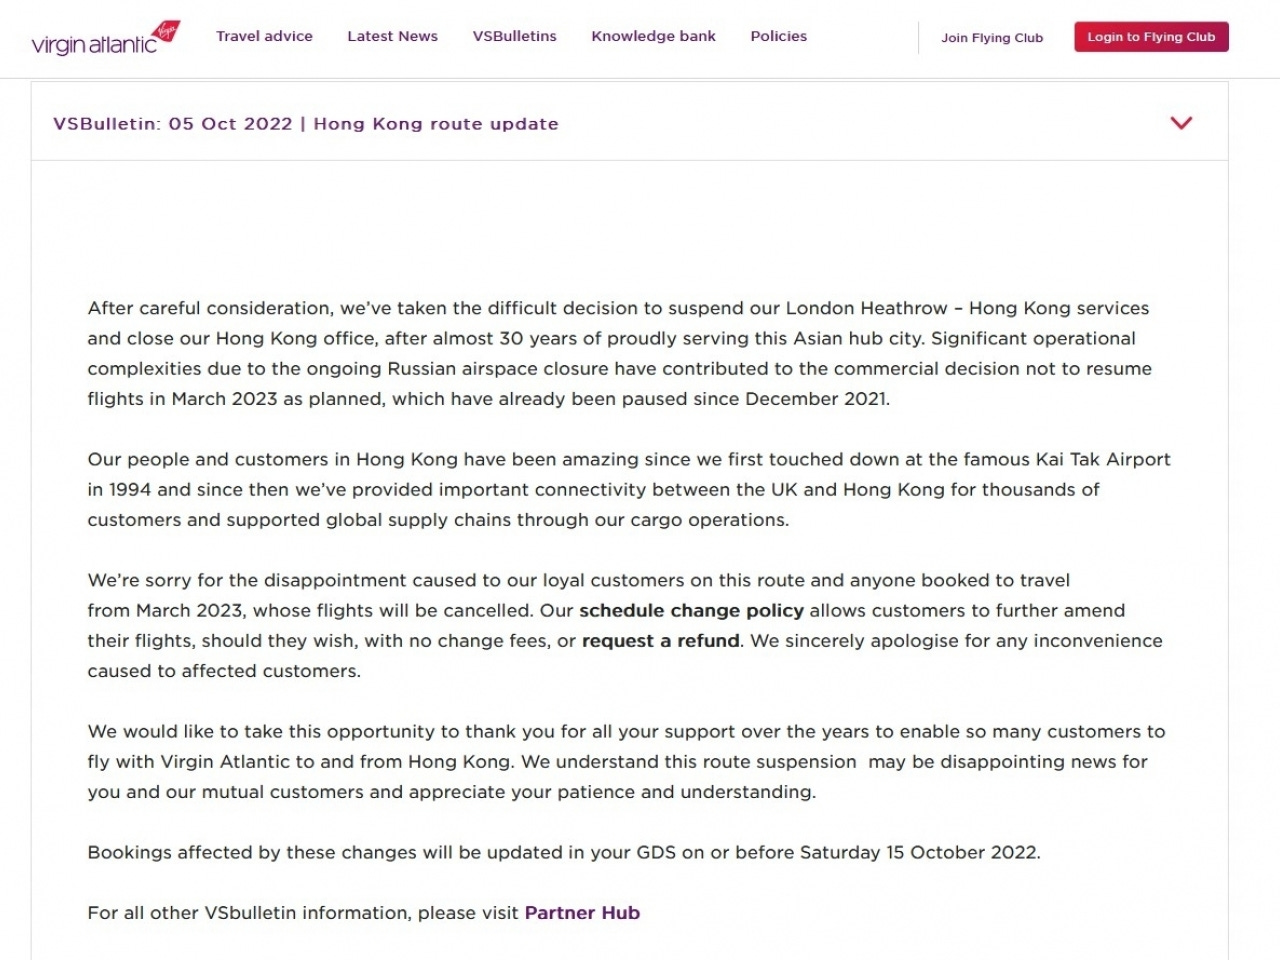 Virgin Atlantic apologises to customers affected by its decision to scrap its Hong Kong-London flights in an announcement on its website. Screenshot from Virgin Atlantic website